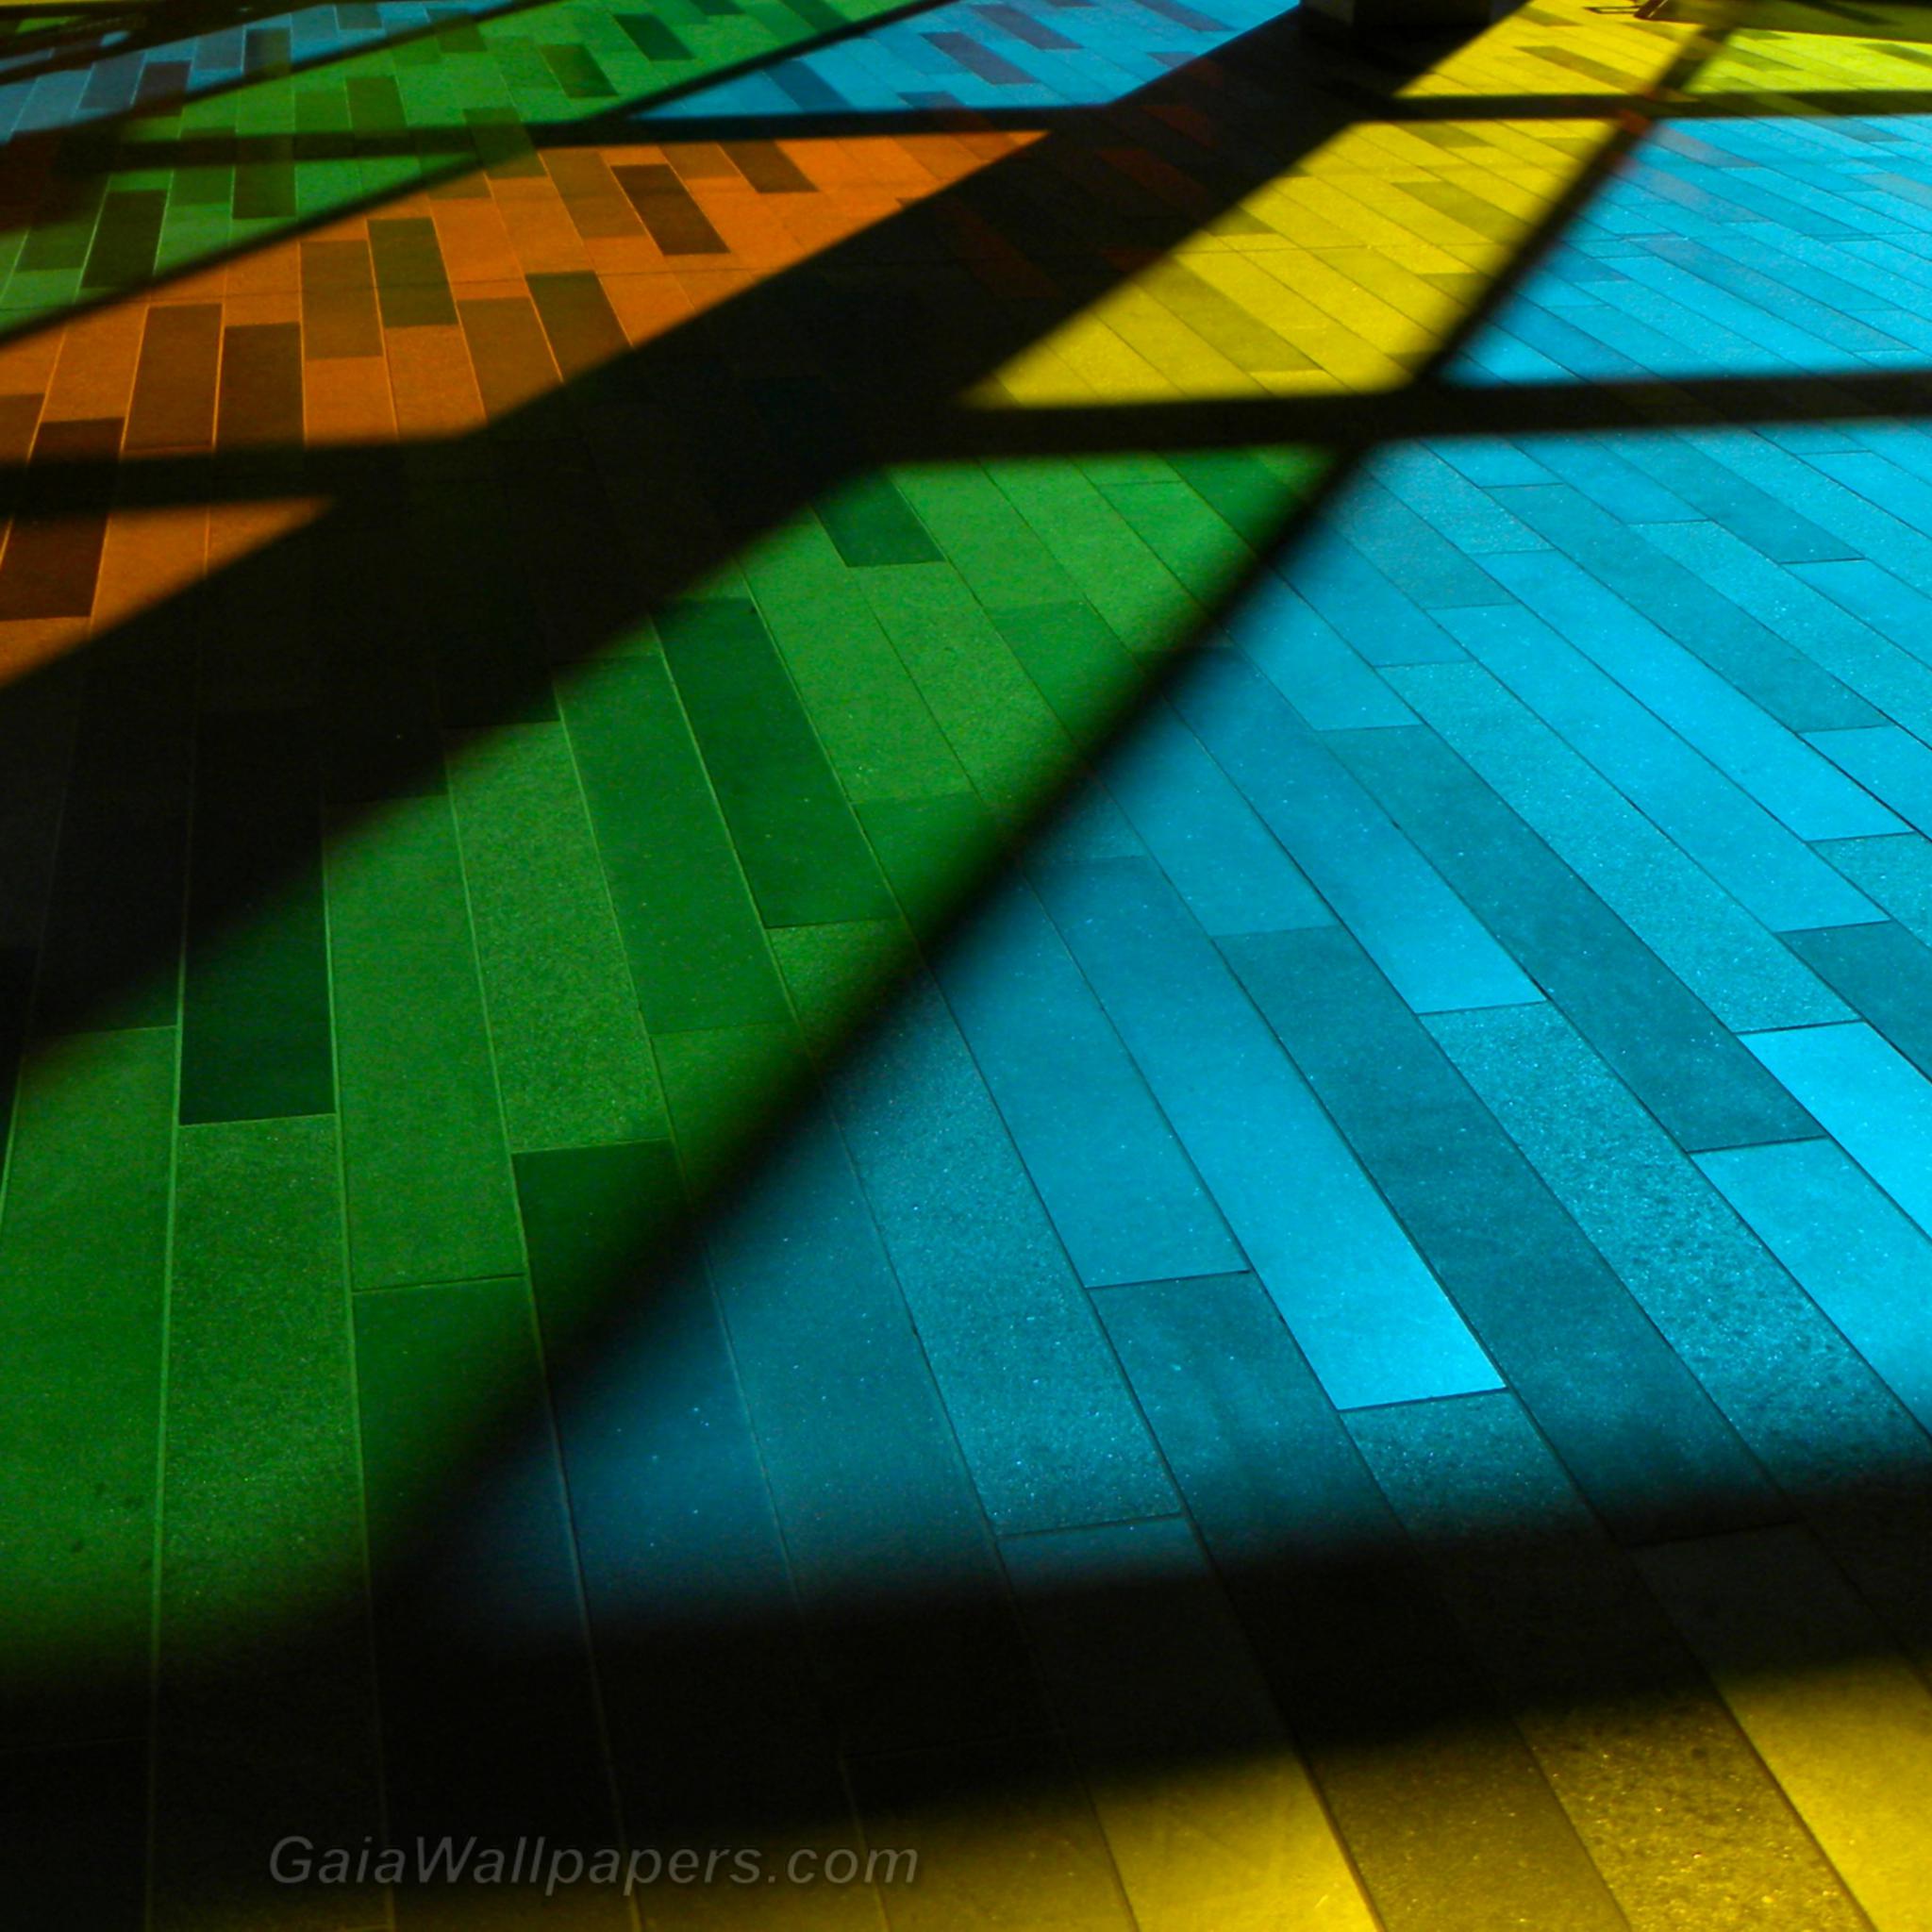 Window colors projected on the ground - Free desktop wallpapers